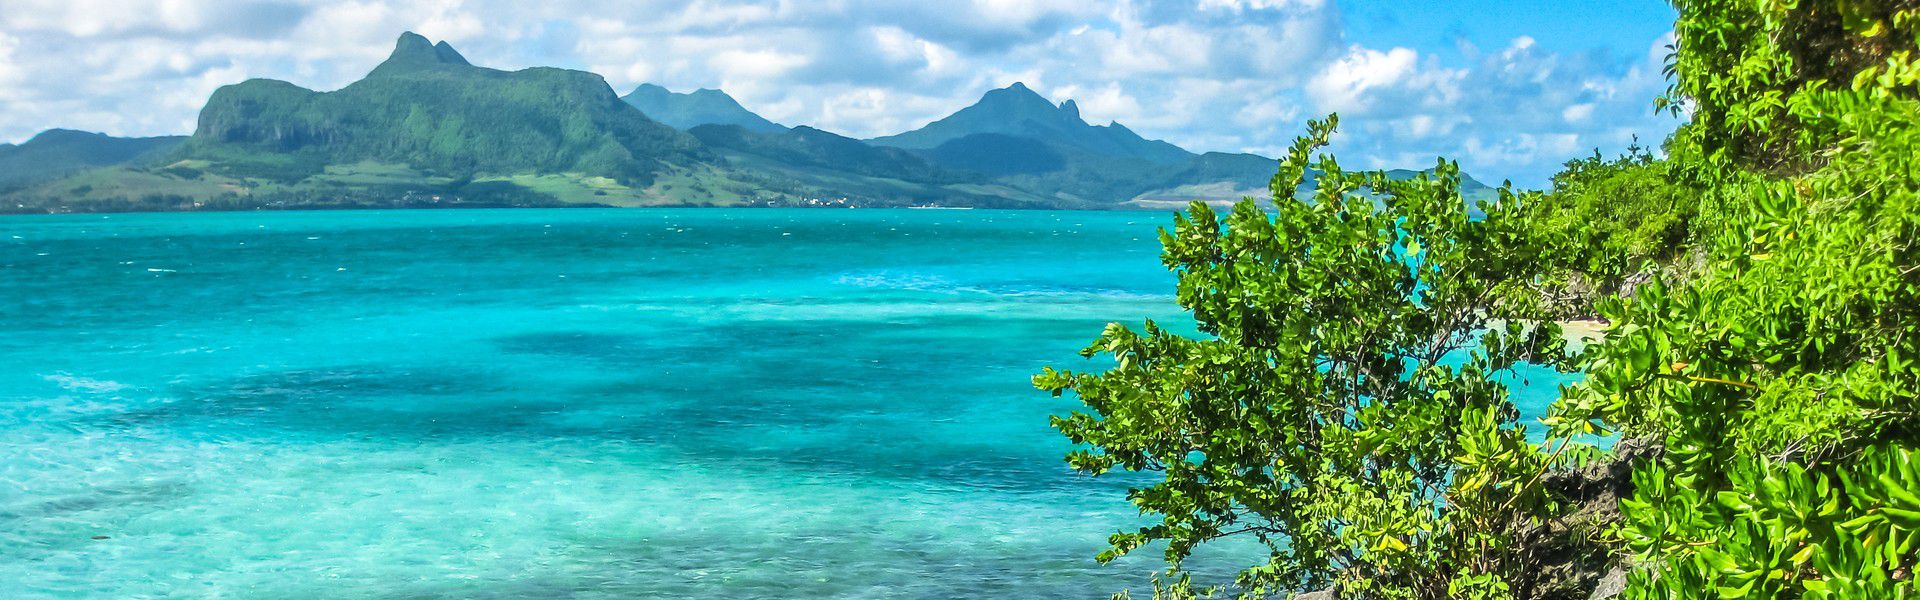 In the bay of Mahebourg, about 850 metres off the south-east coast of Mauritius, there is a unique islet, which has been declared as nature reserve in 1965 and is preserved by the Mauritius Wildlife Foundation; the Ile aux Aigrettes. Follow us to enjoy the portrayal of a marvelously unique and unforgettable escape.